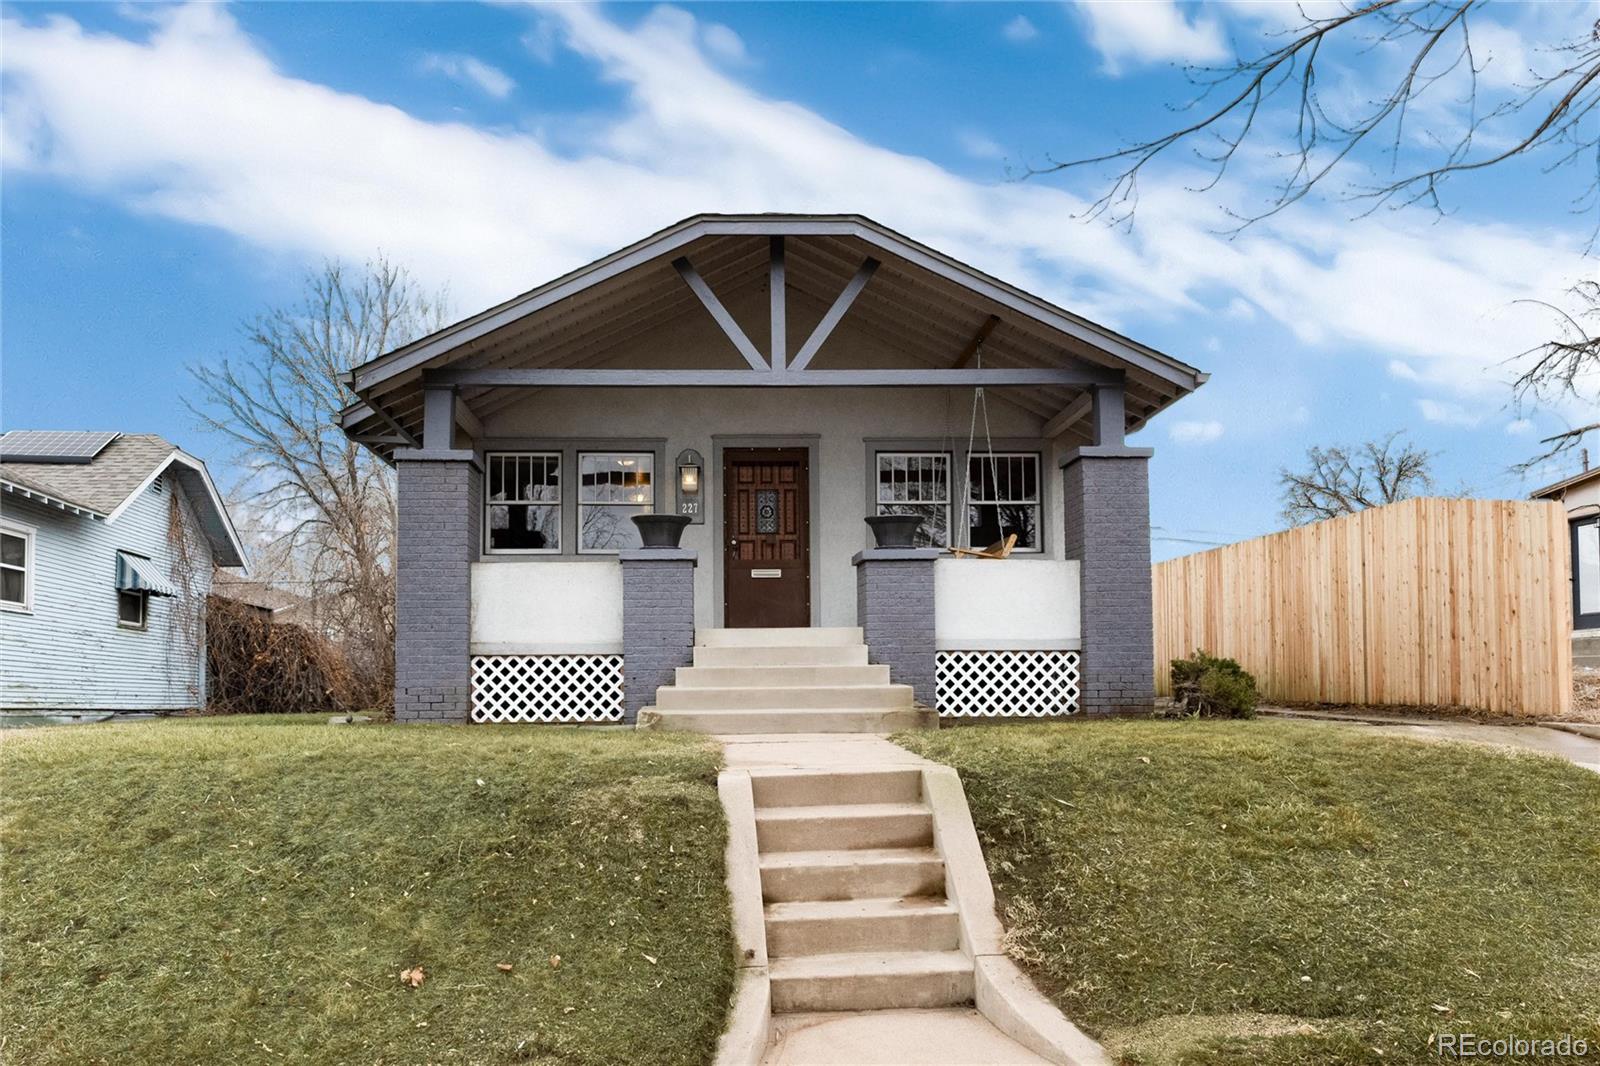 227 s grove street, Denver sold home. Closed on 2024-03-20 for $513,000.